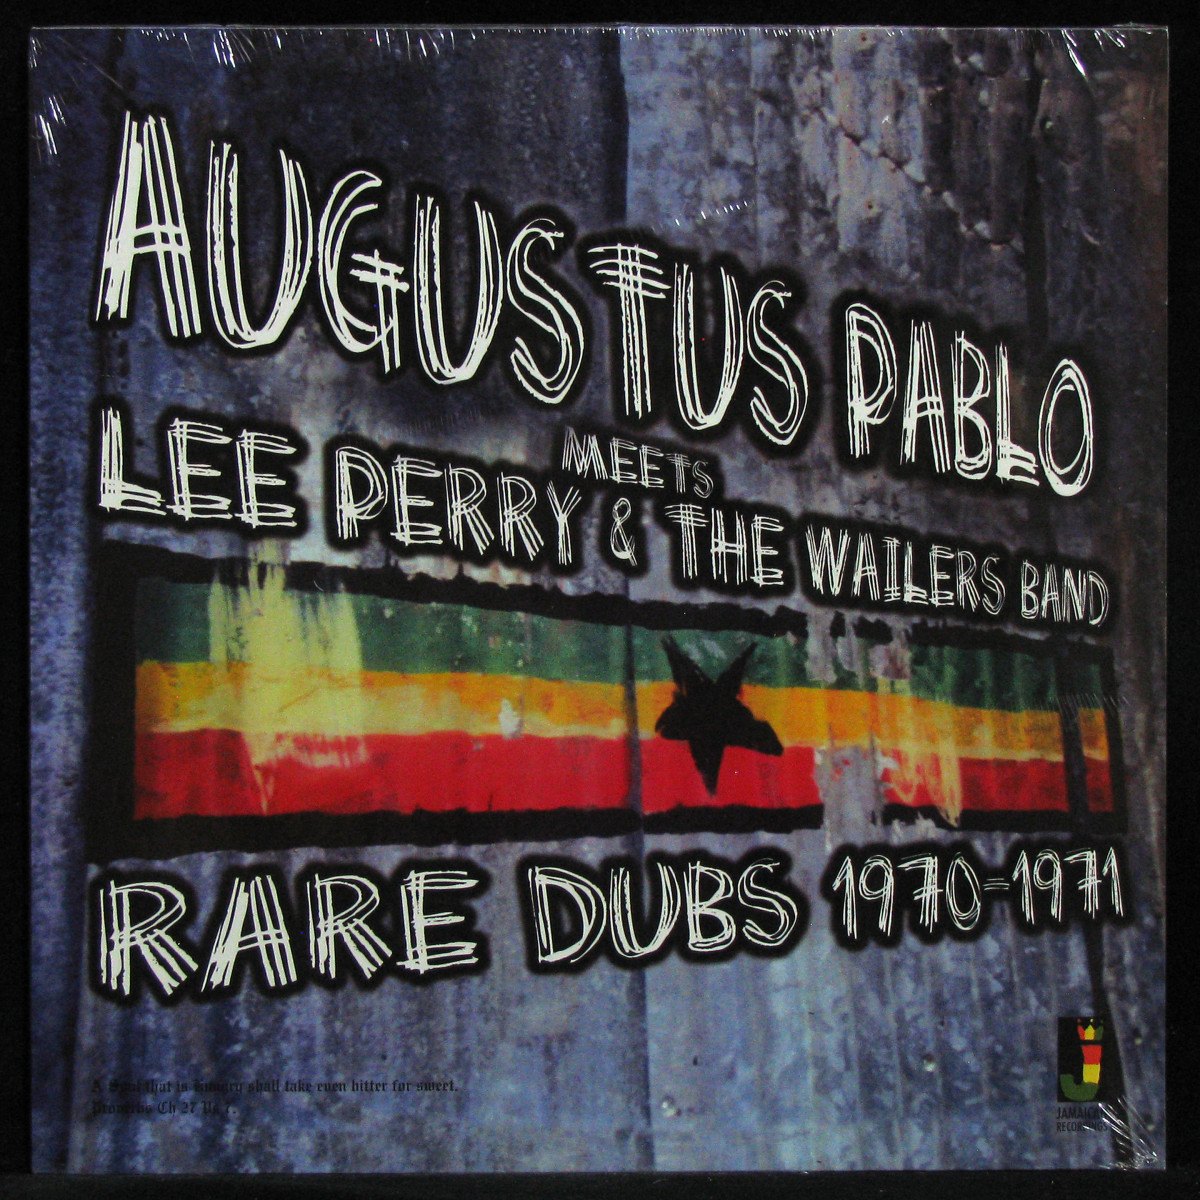 LP Augustus Pablo / Lee Perry & The Wailers Band — Rare Dubs 1970-1971 фото